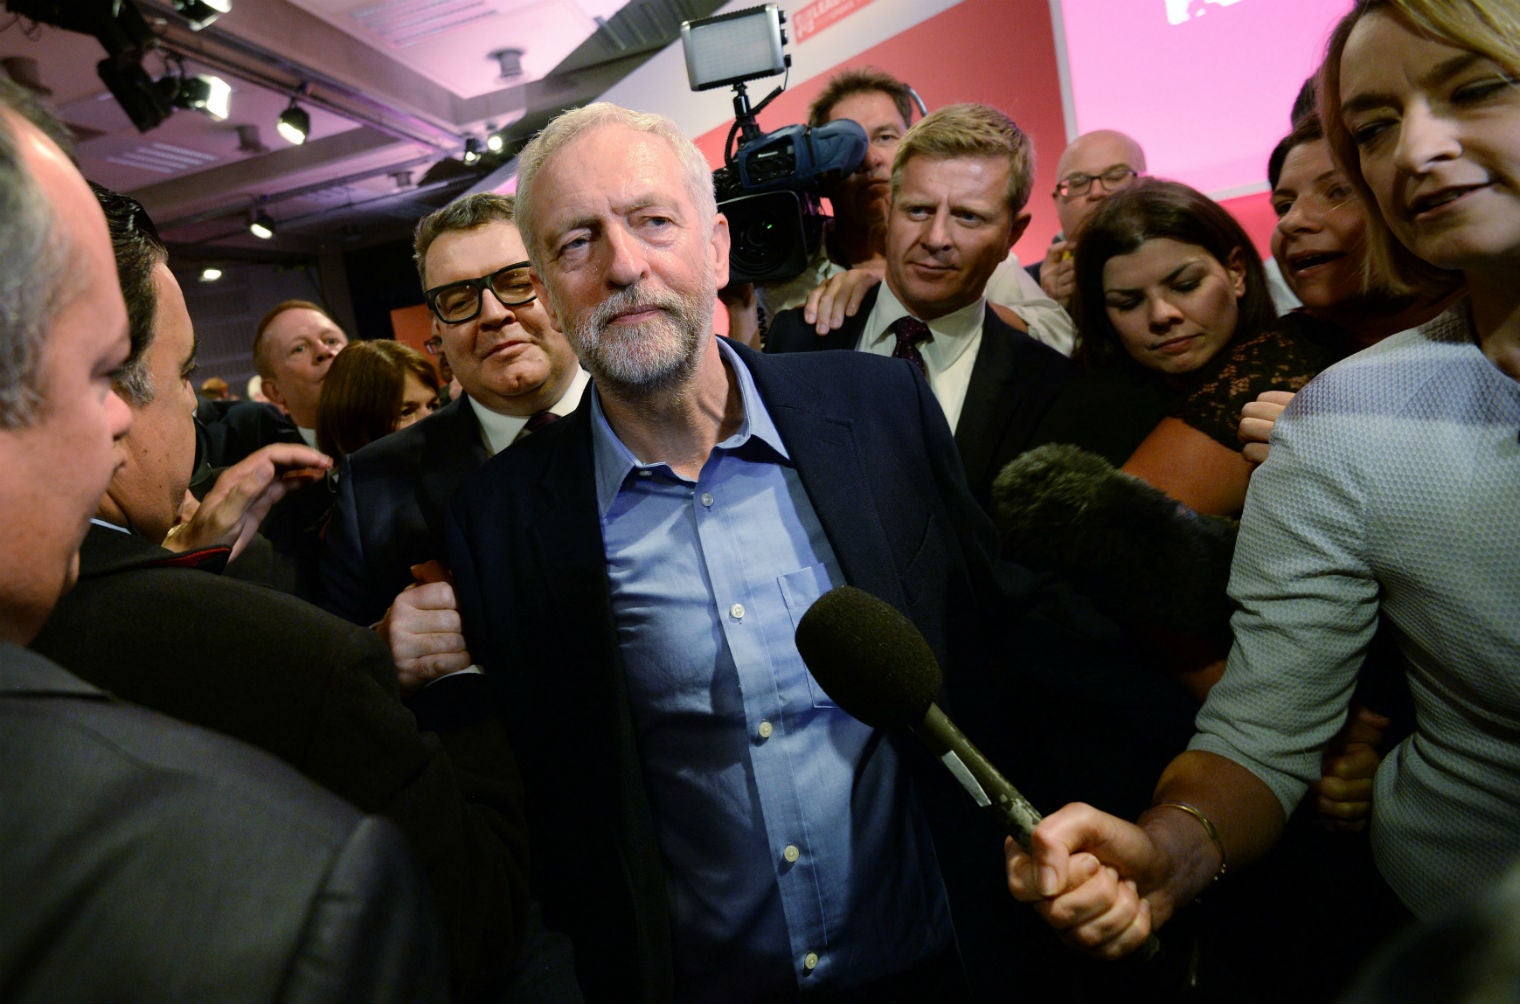 Jeremy Corbyn was elected by a landslide on Saturday